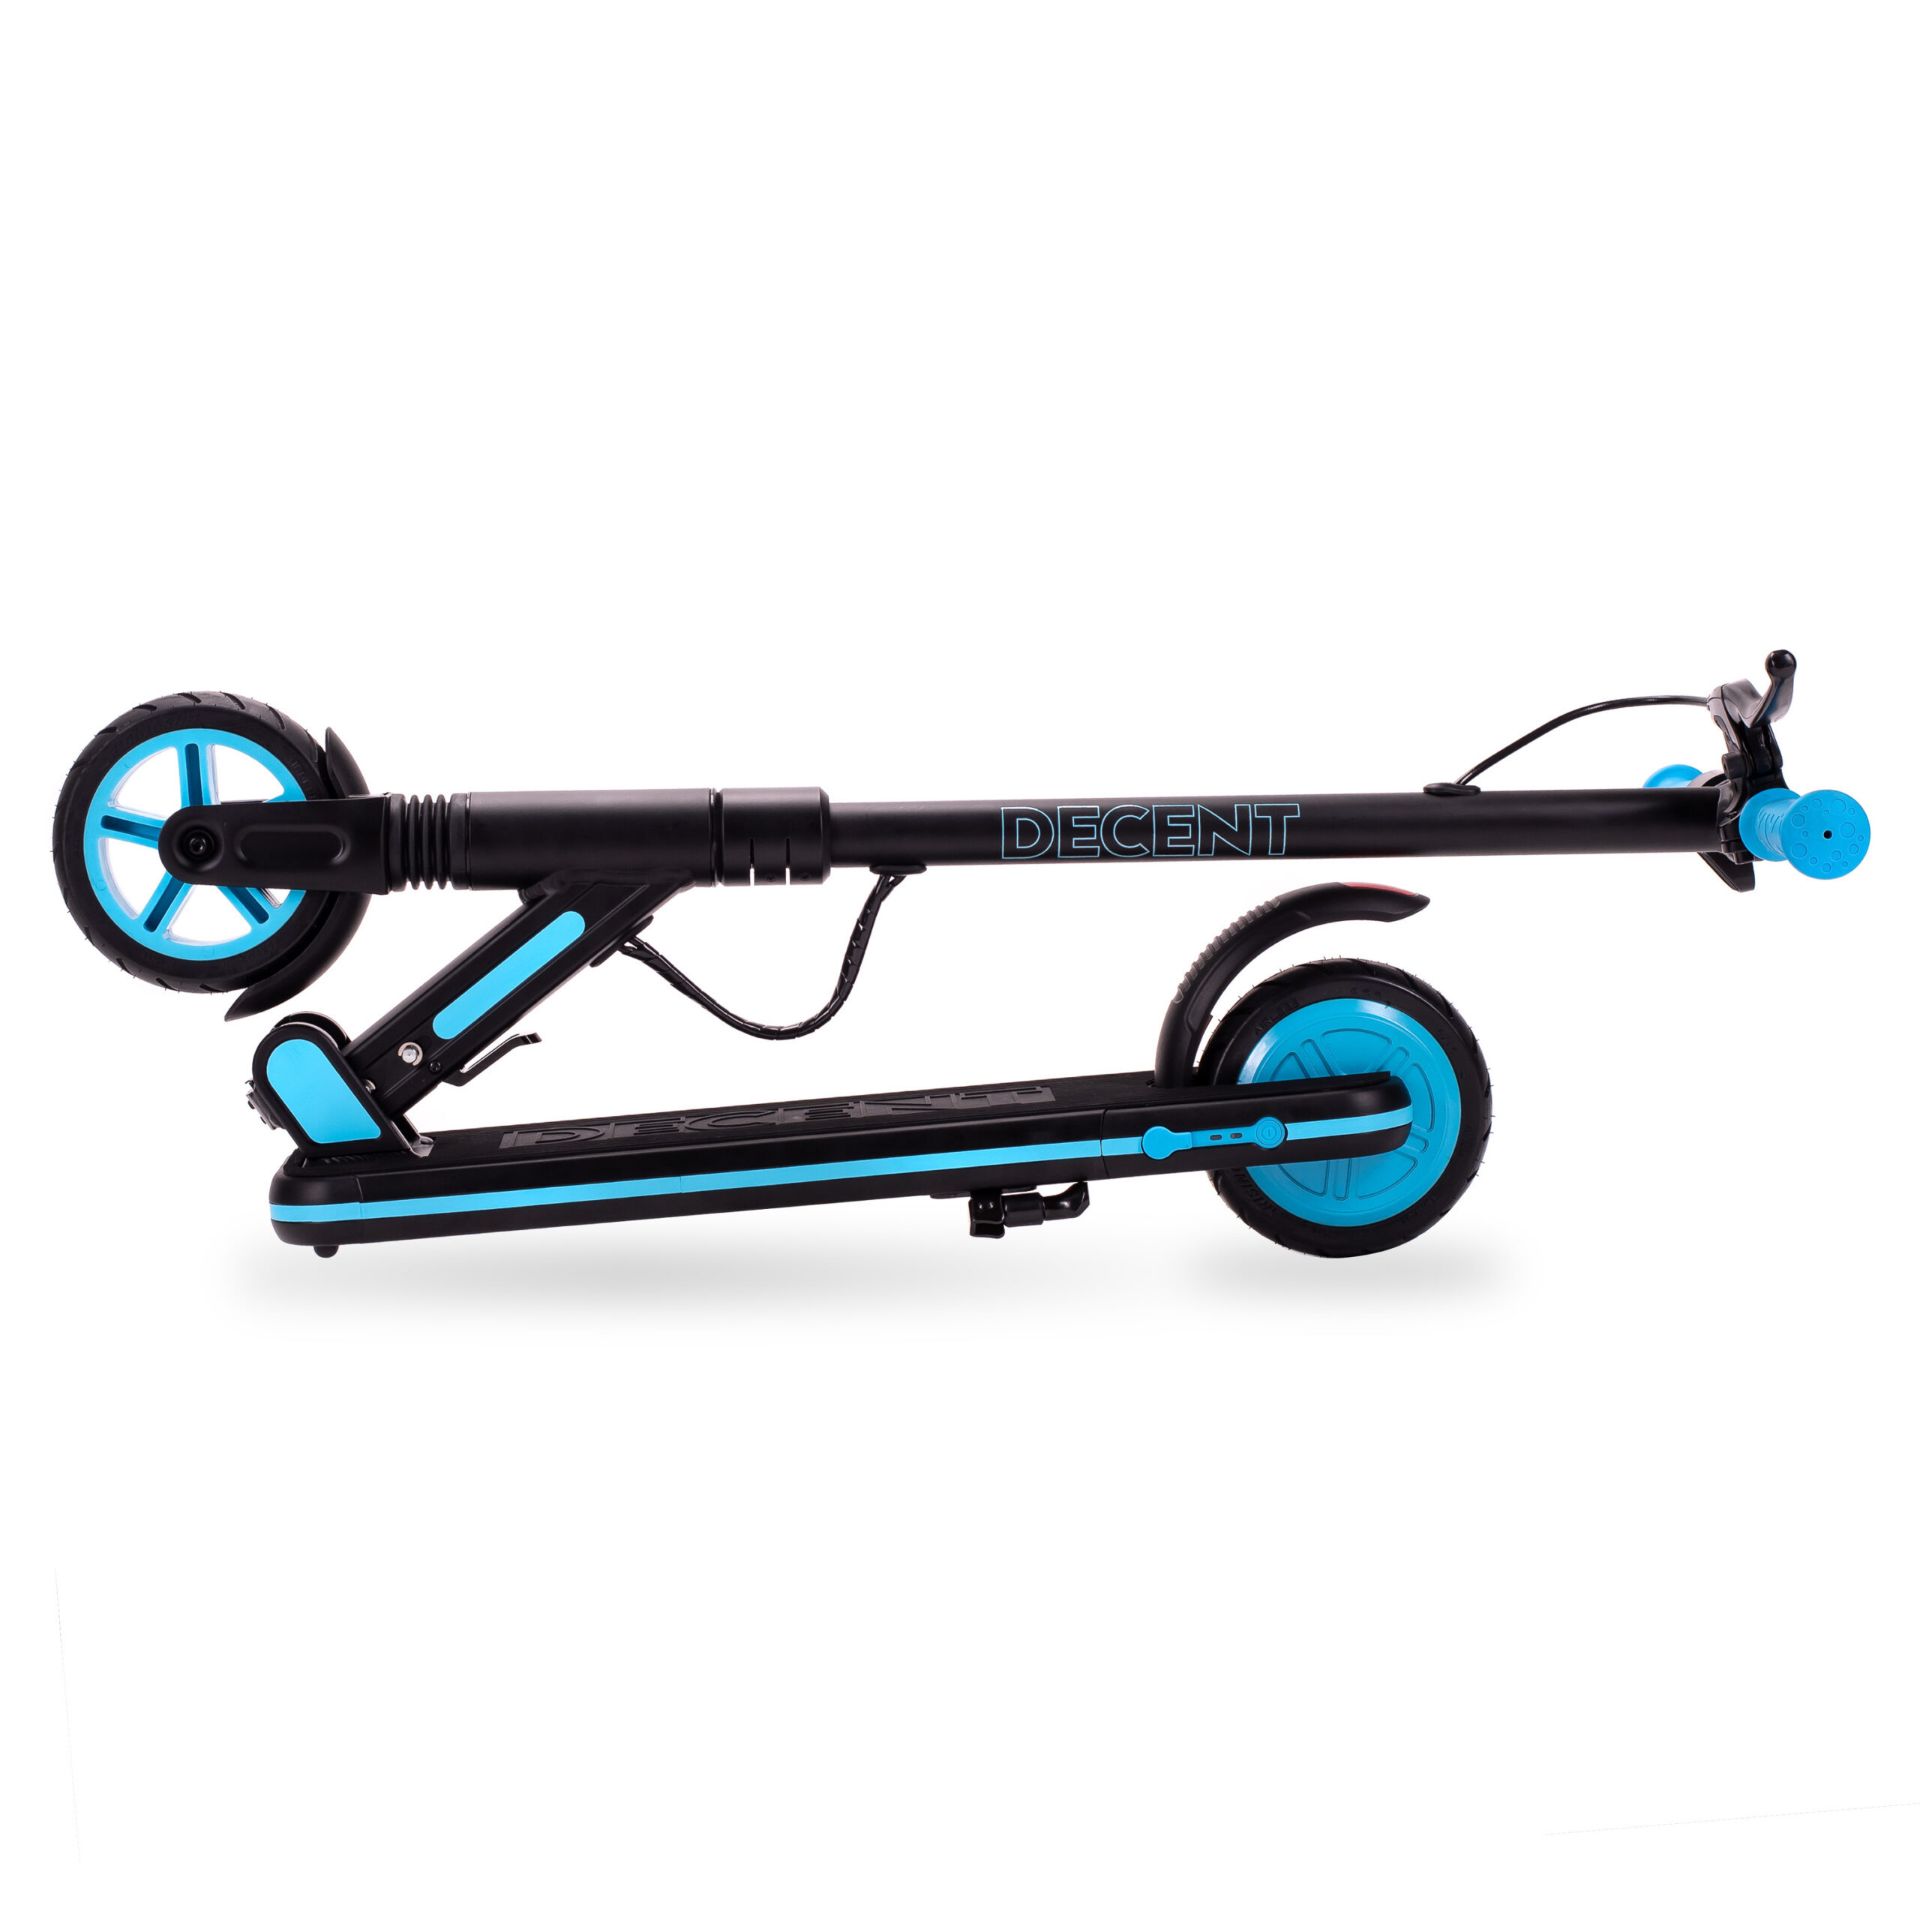 New & Boxed DECENT Kids Electric Scooter - Blue/Black. Let your kids zip around in style. With - Image 2 of 3